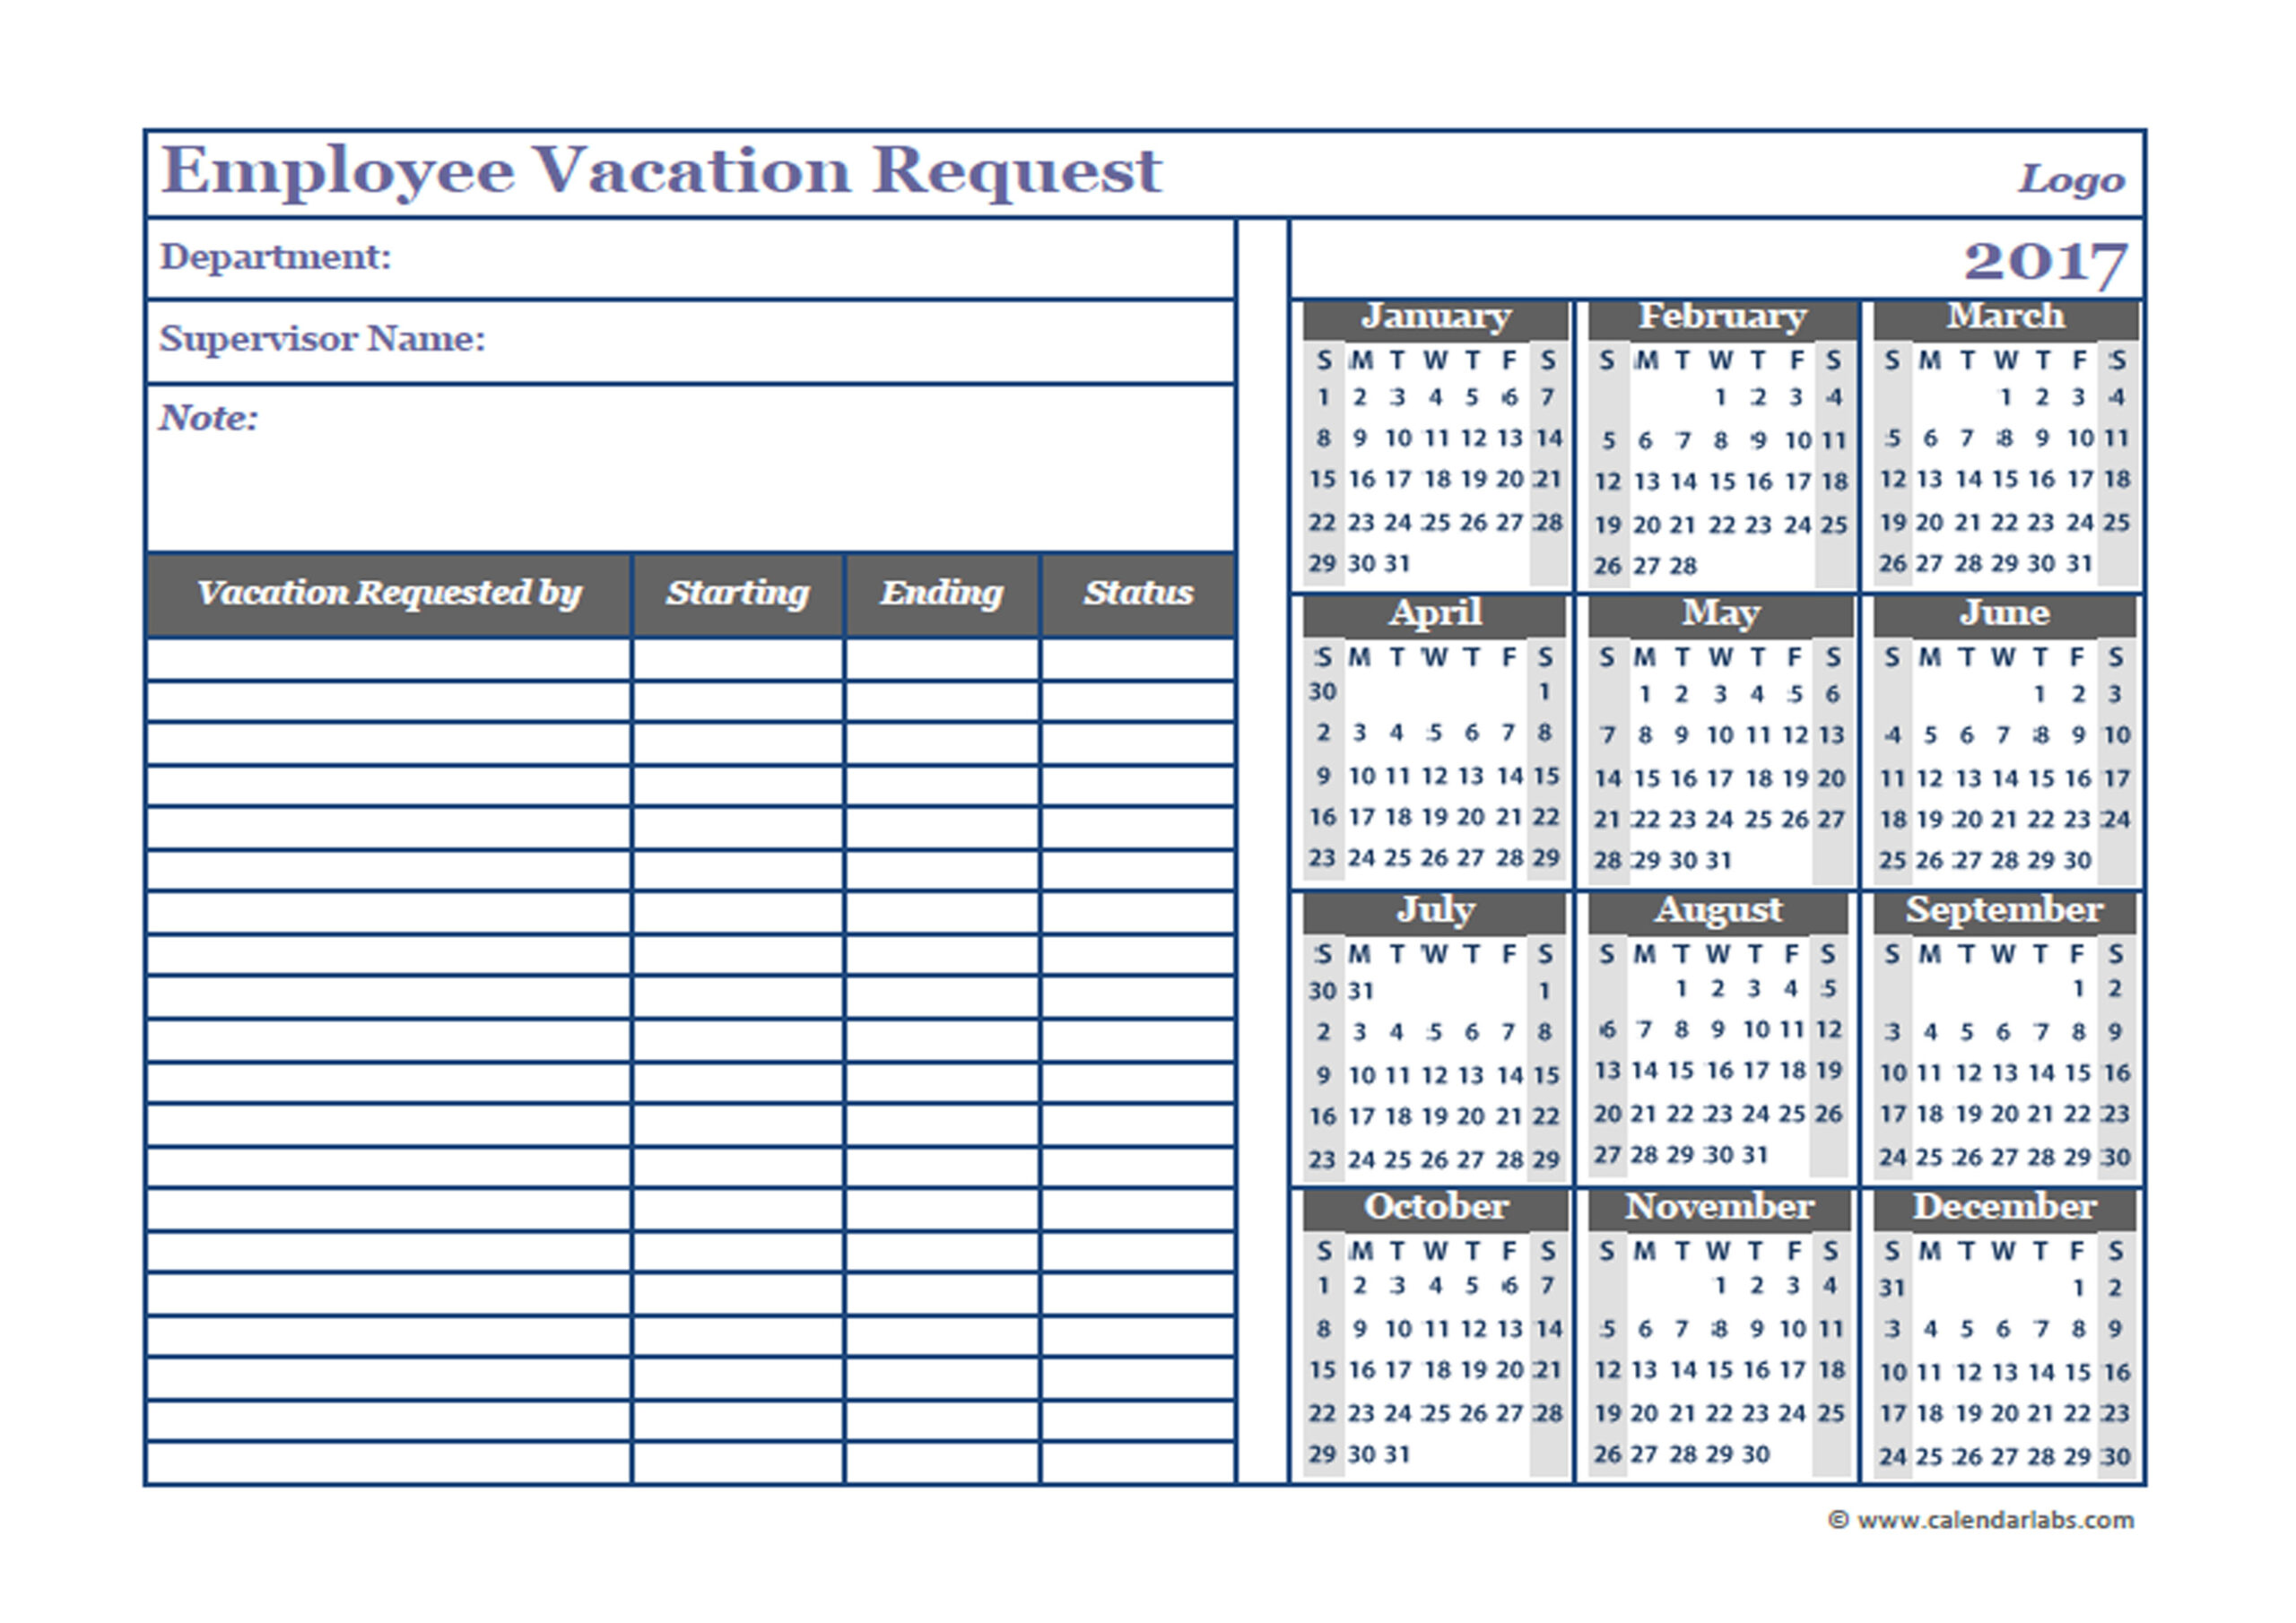 2017 Business Employee Vacation Request - Free Printable-2021 Excel Calendar Employee Leave